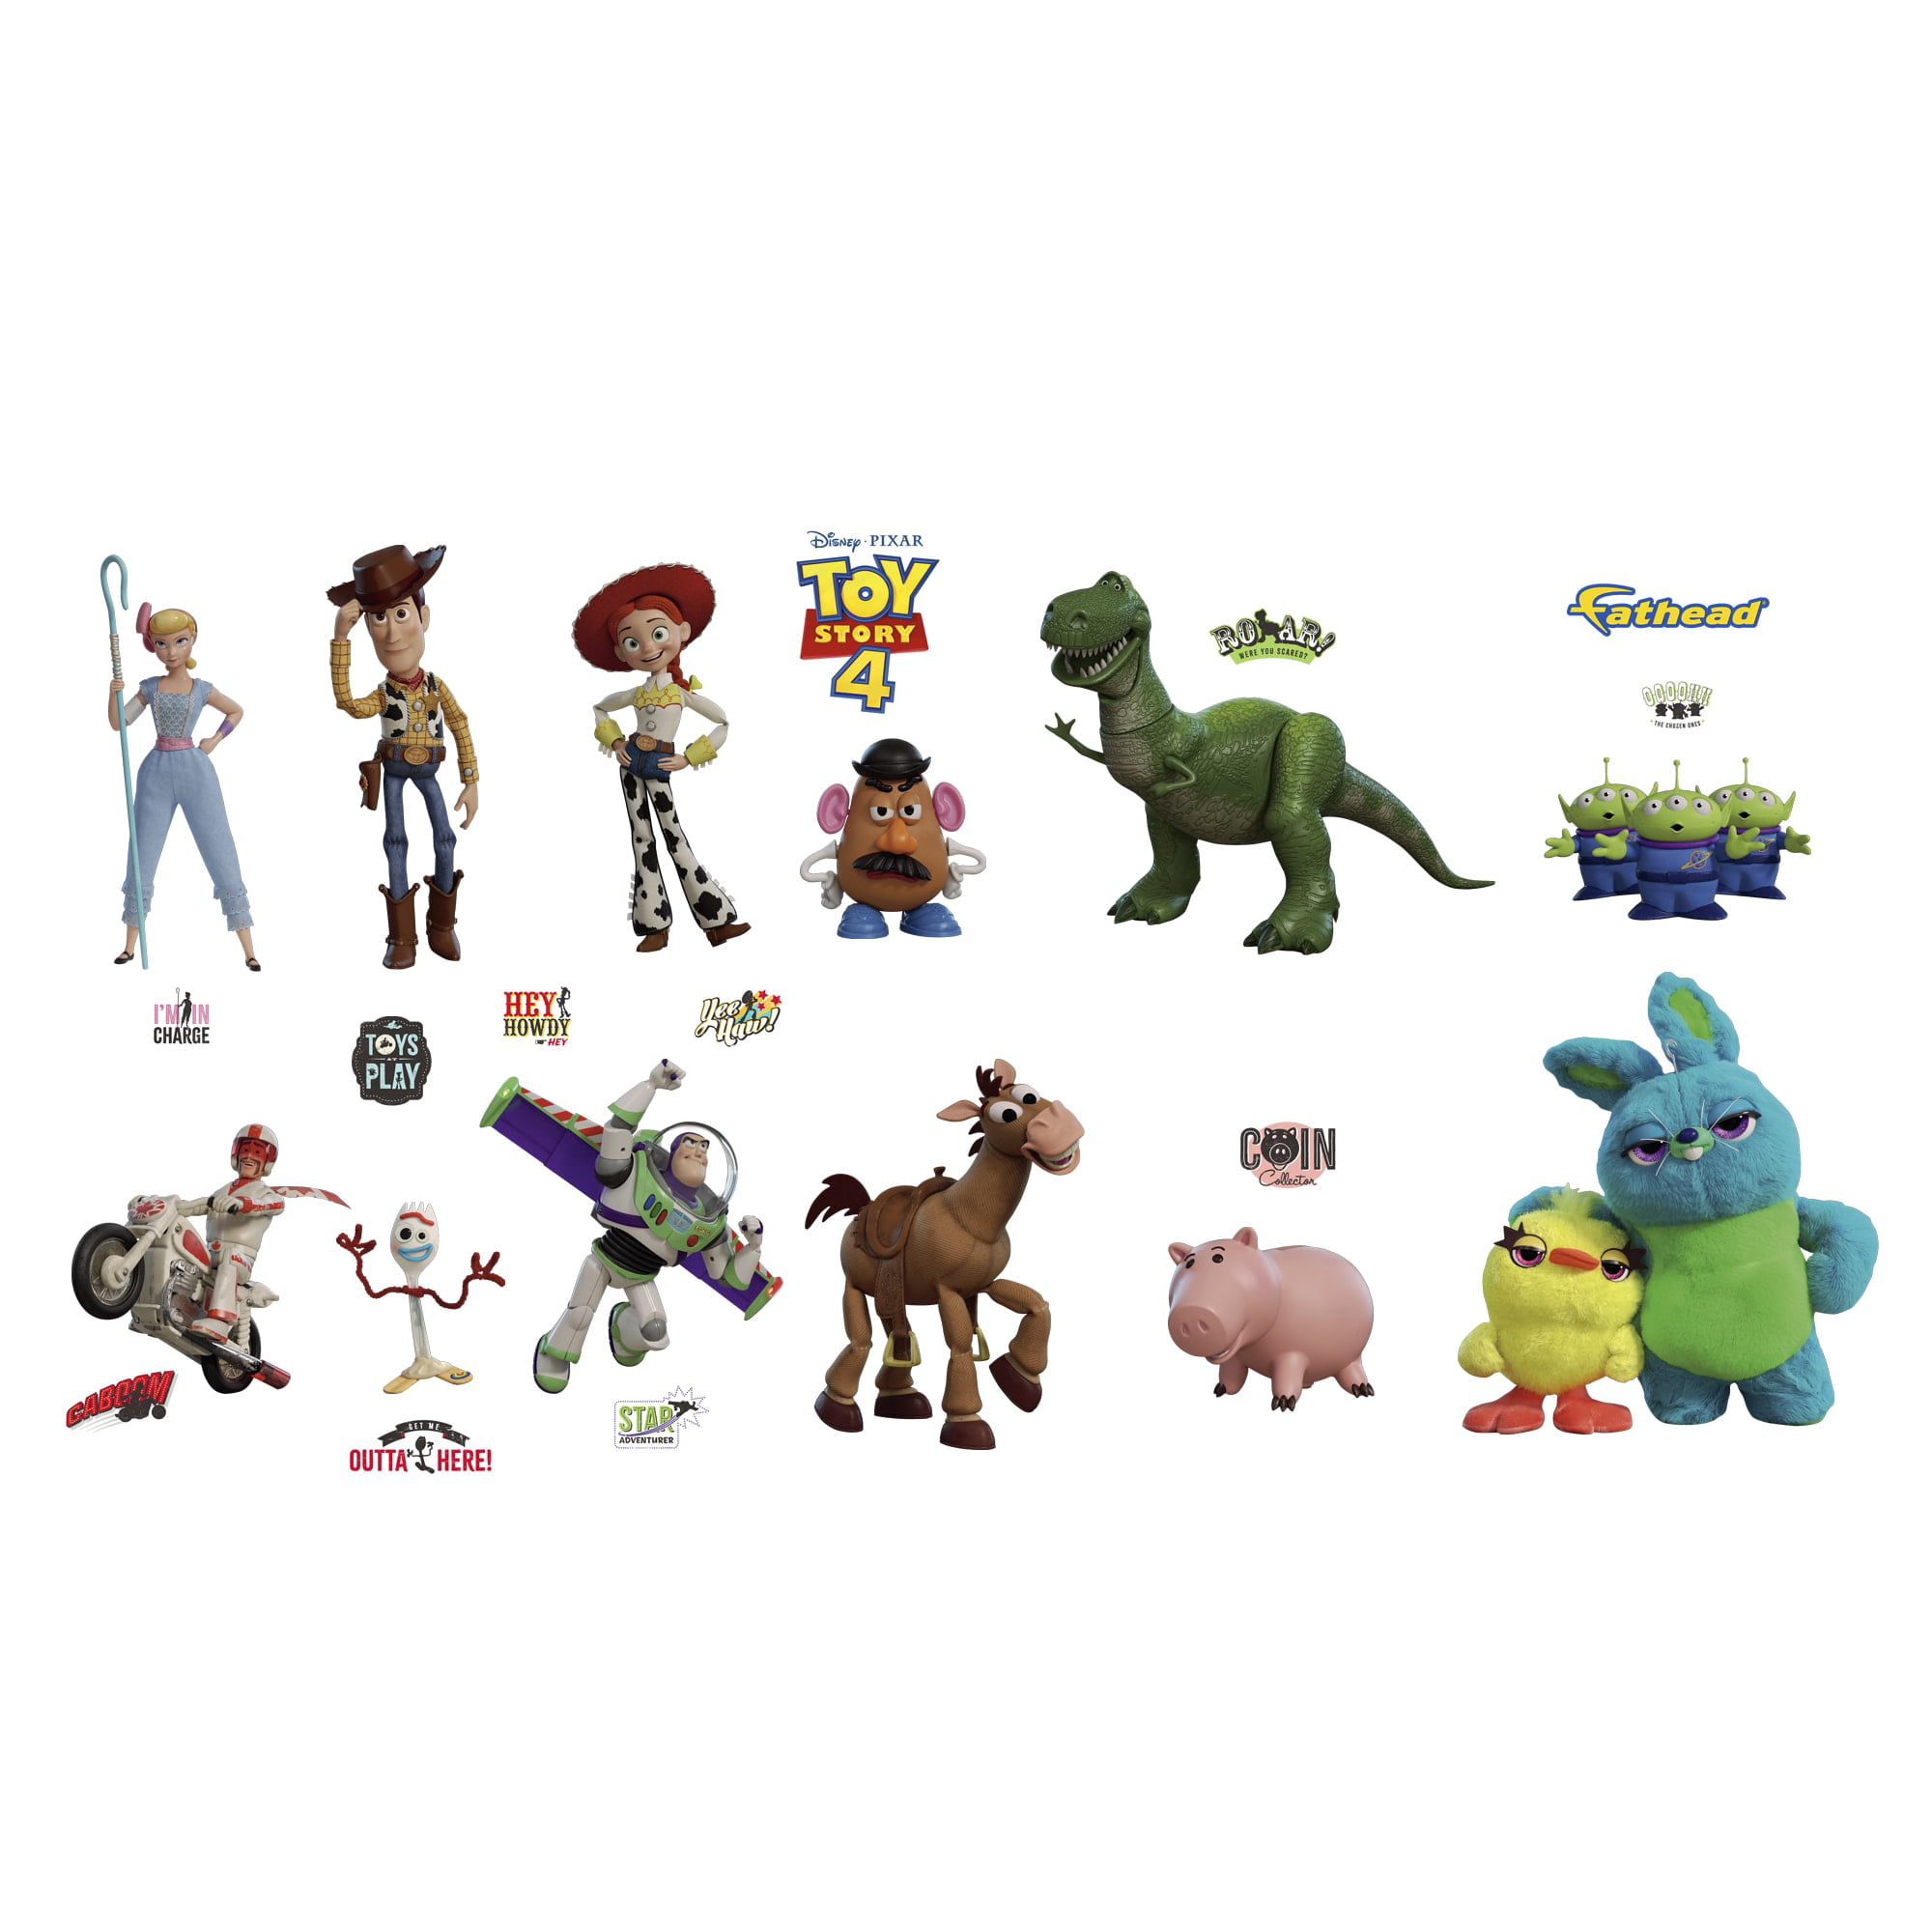 Toy Story 4: Movie Poster Mural - Officially Licensed Disney Removable –  Fathead